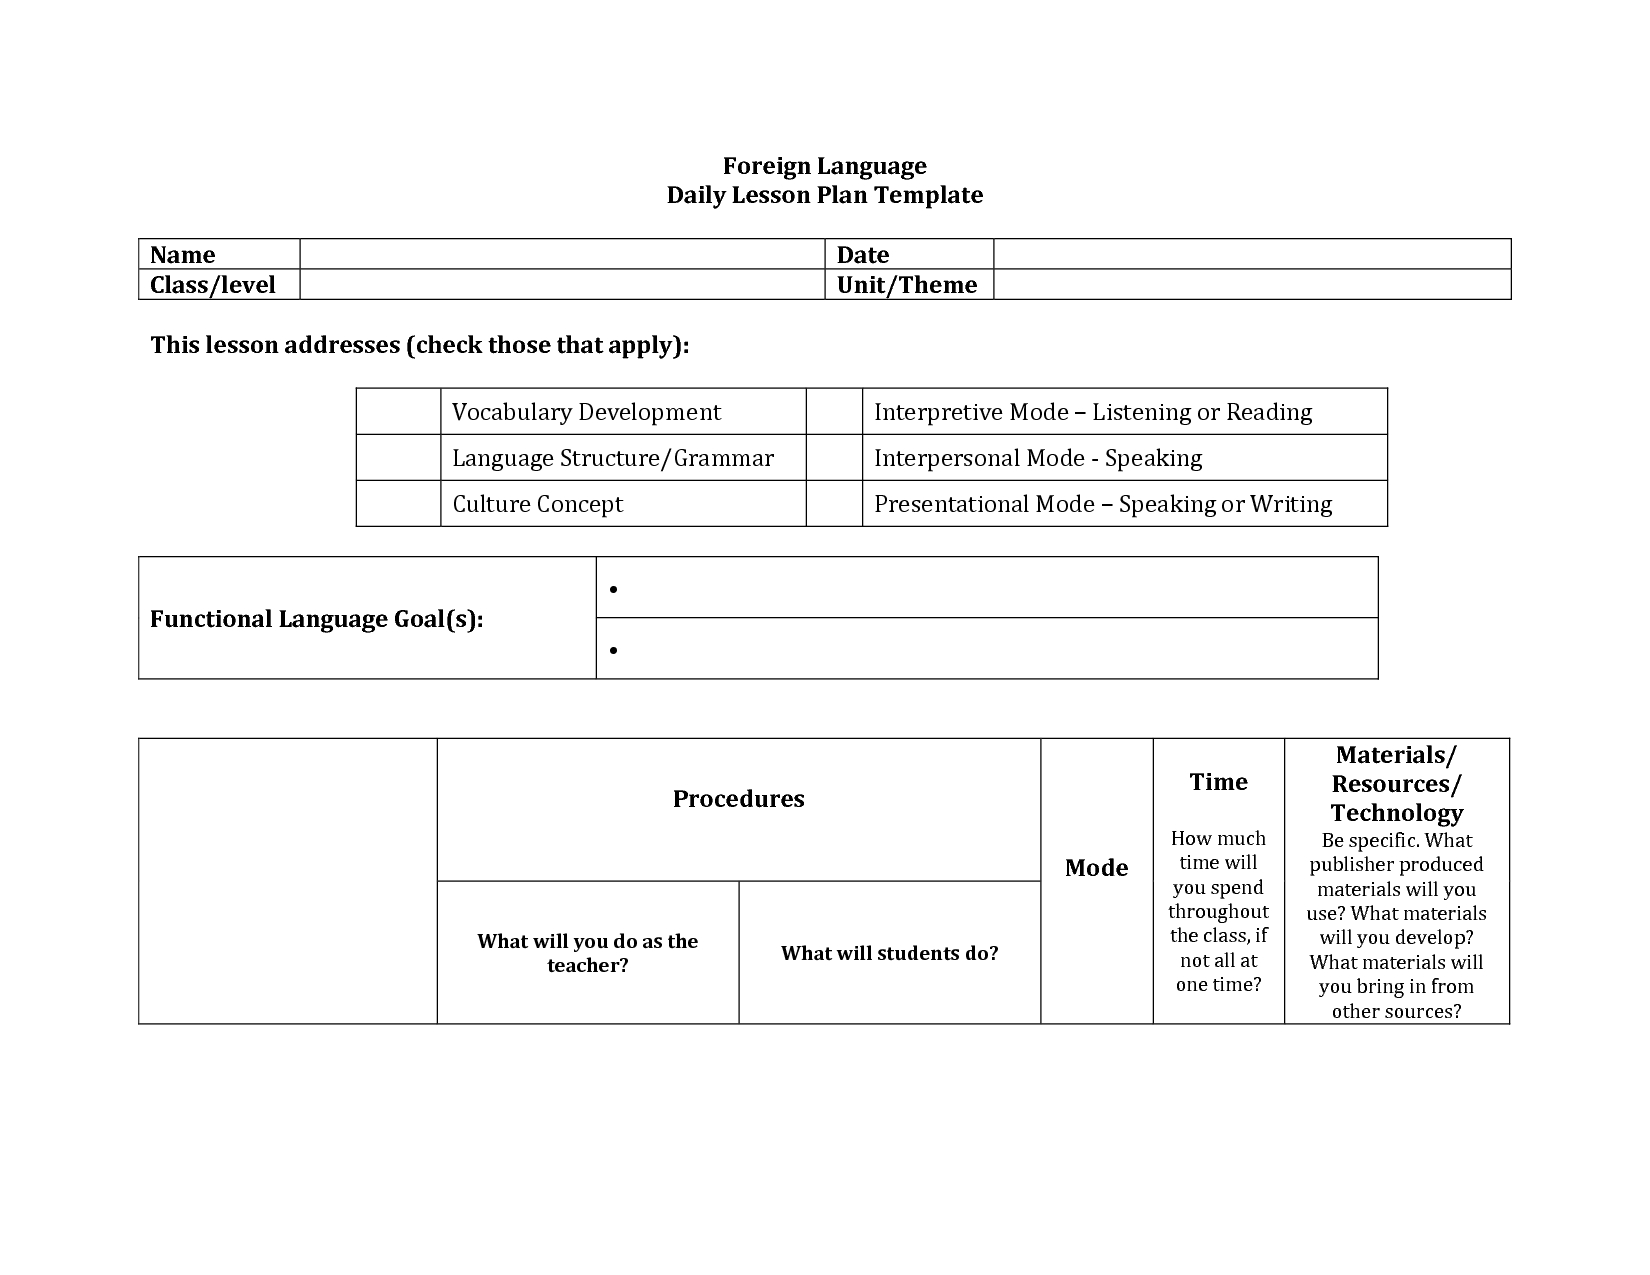 Foreign Language Lesson Plan Format Google Search Plans For